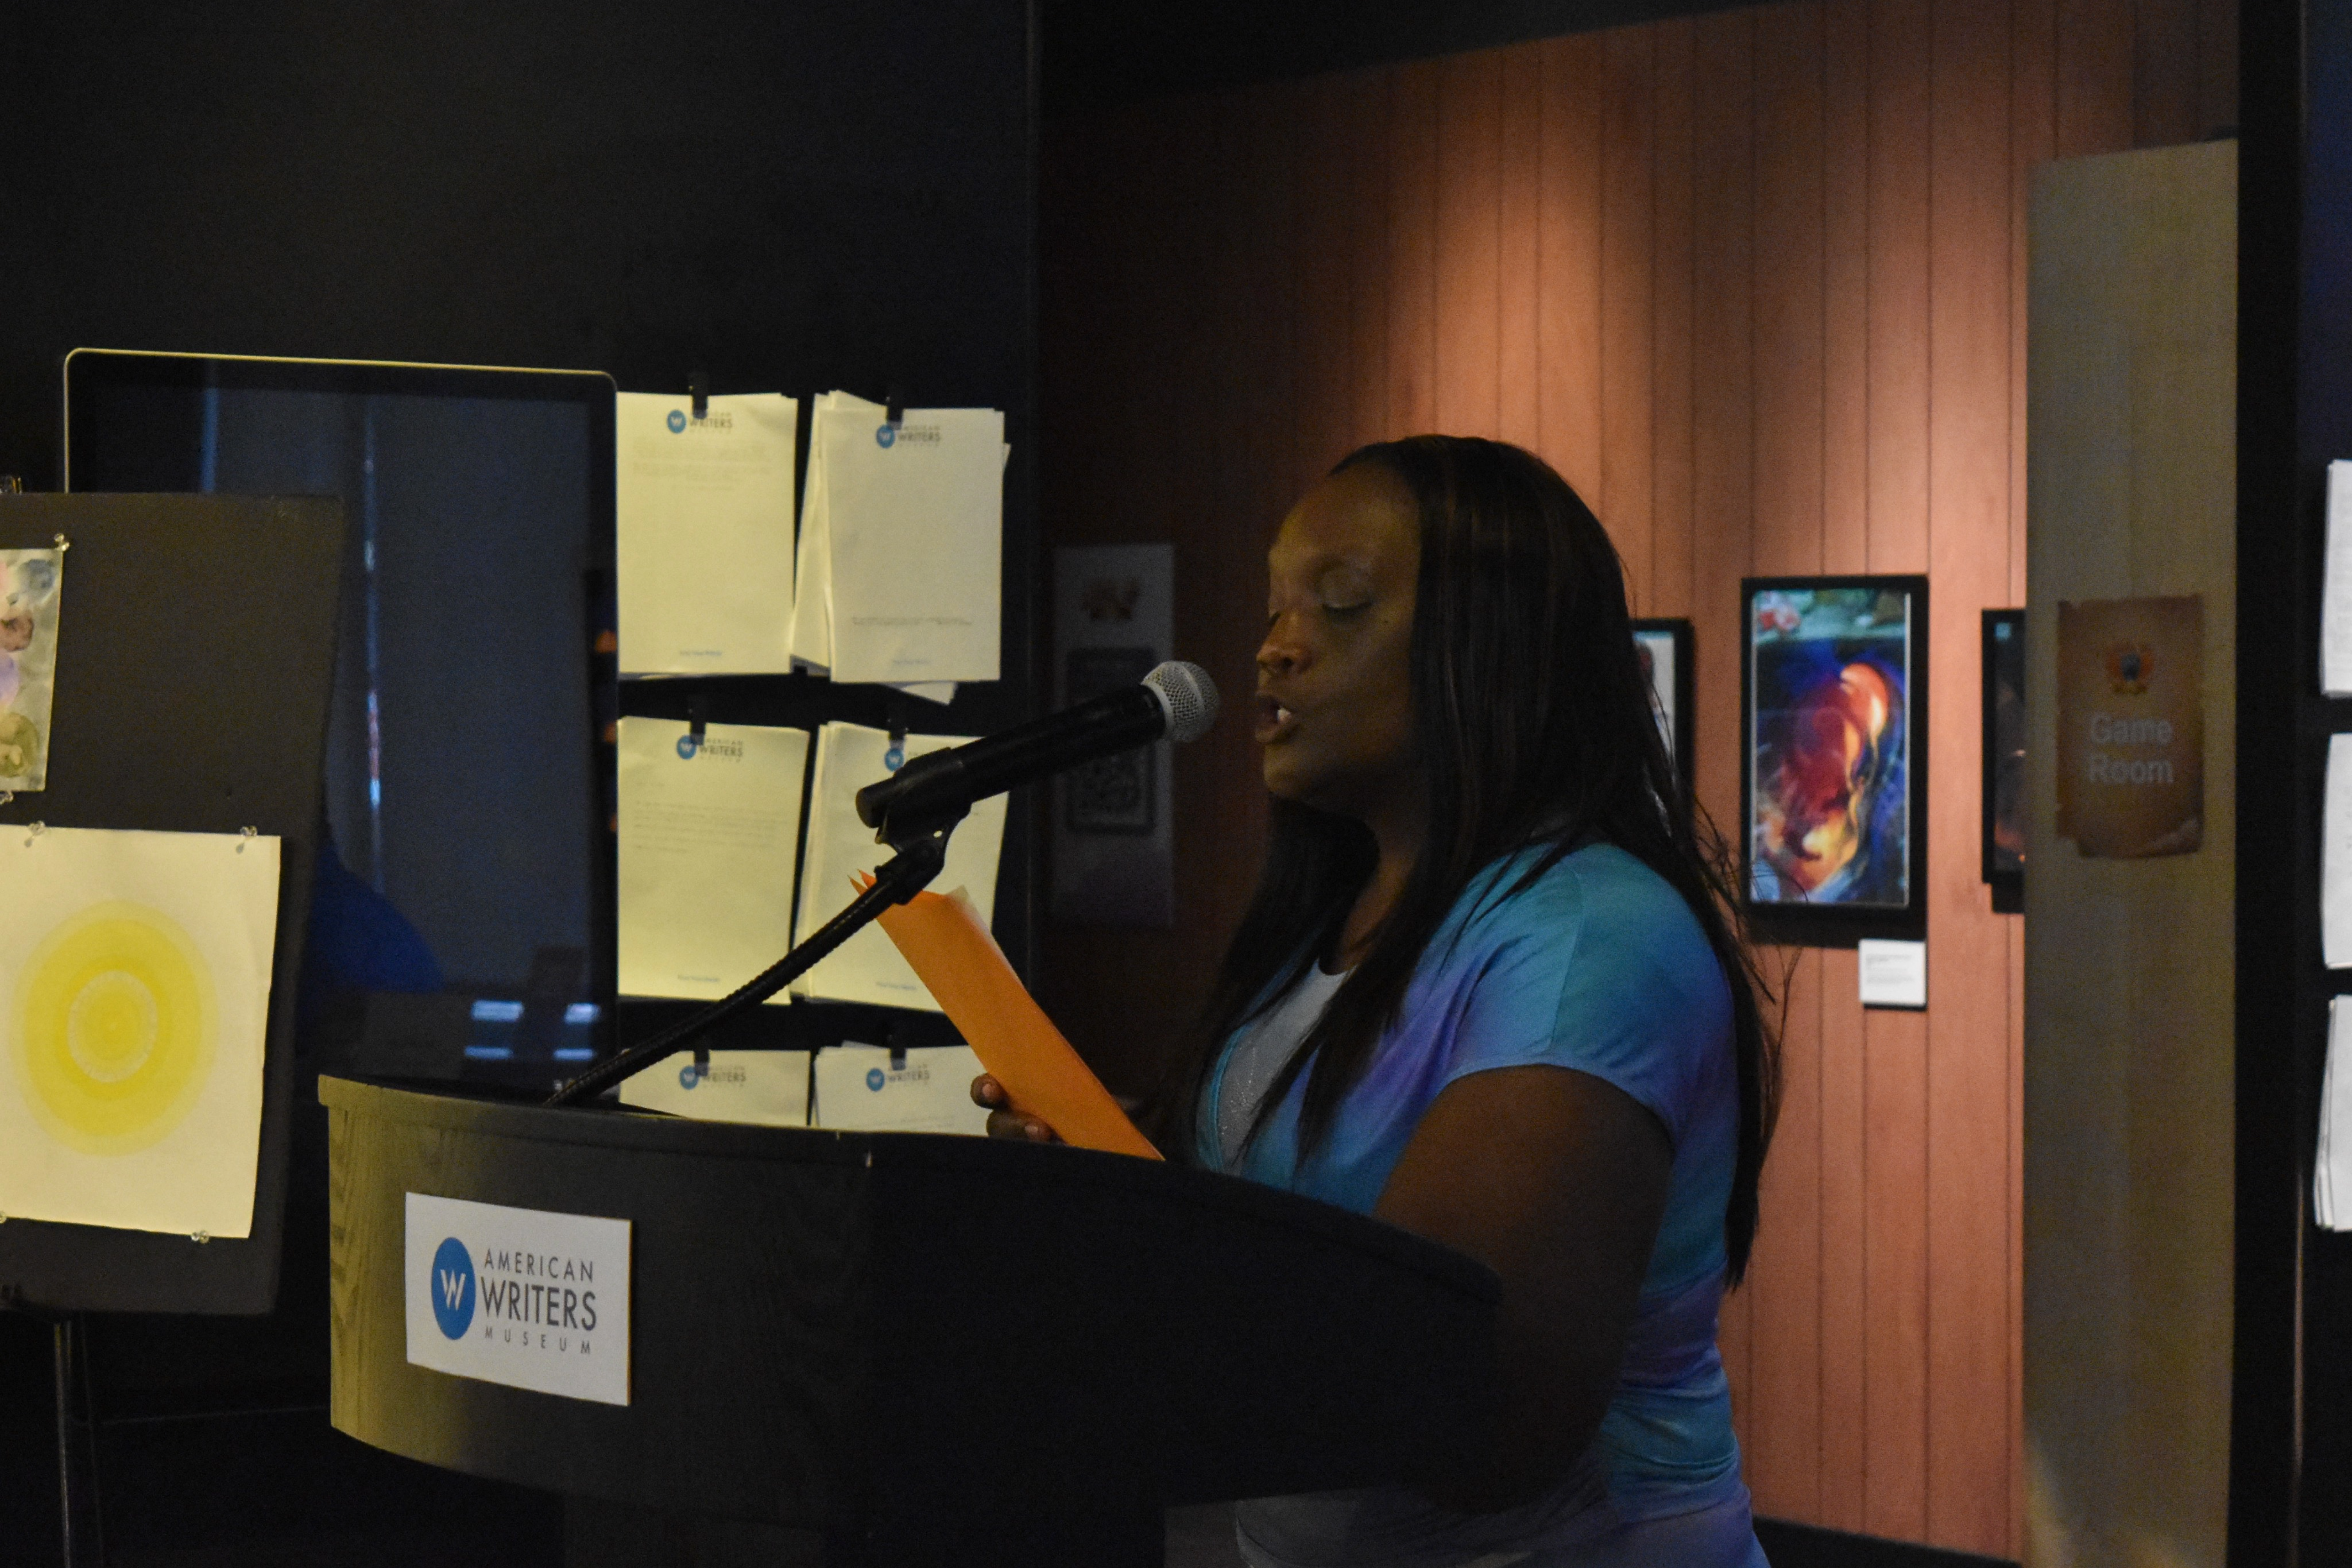 Maxica Williams reads her poem.